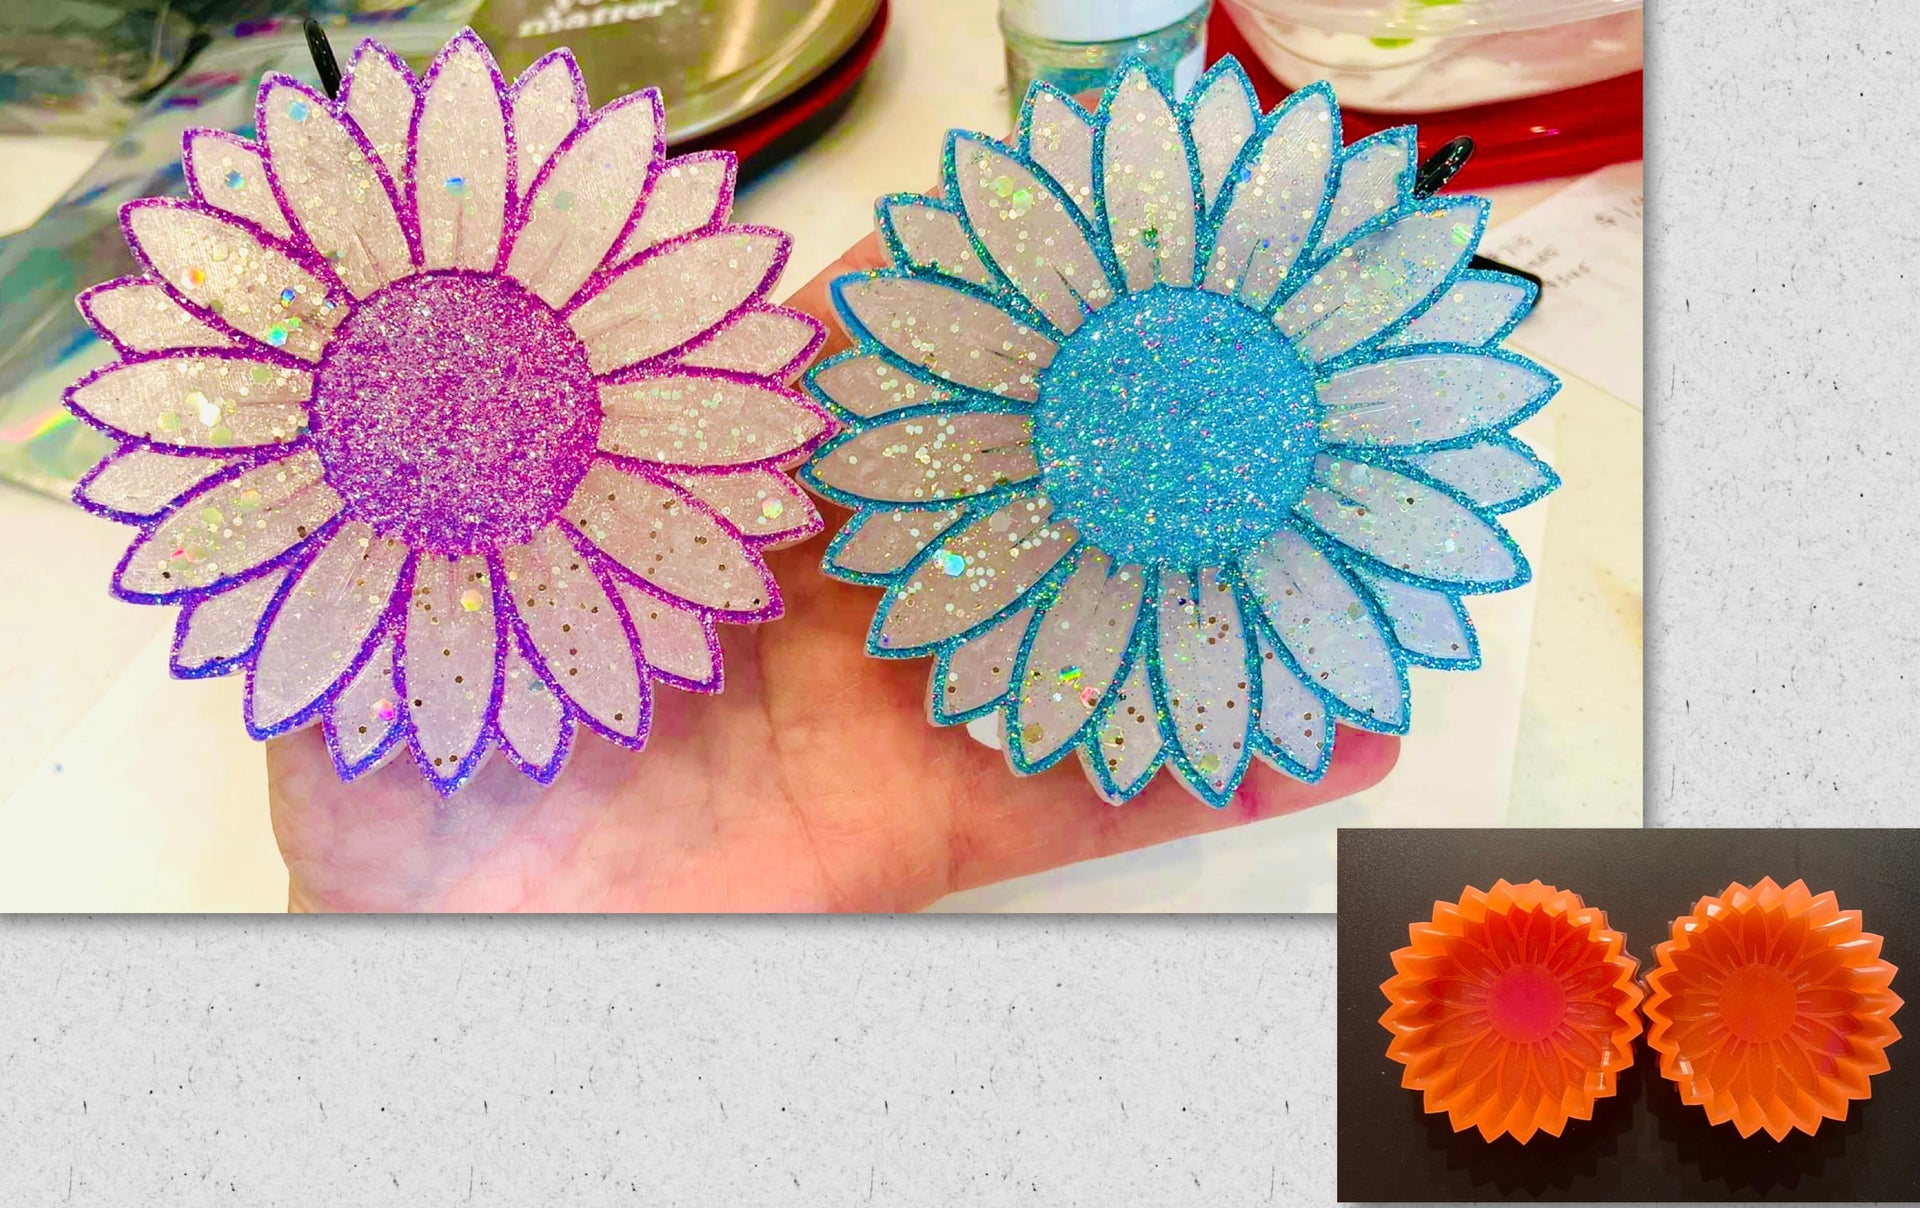 Sunflower Vent Clip tray Freshie Mold